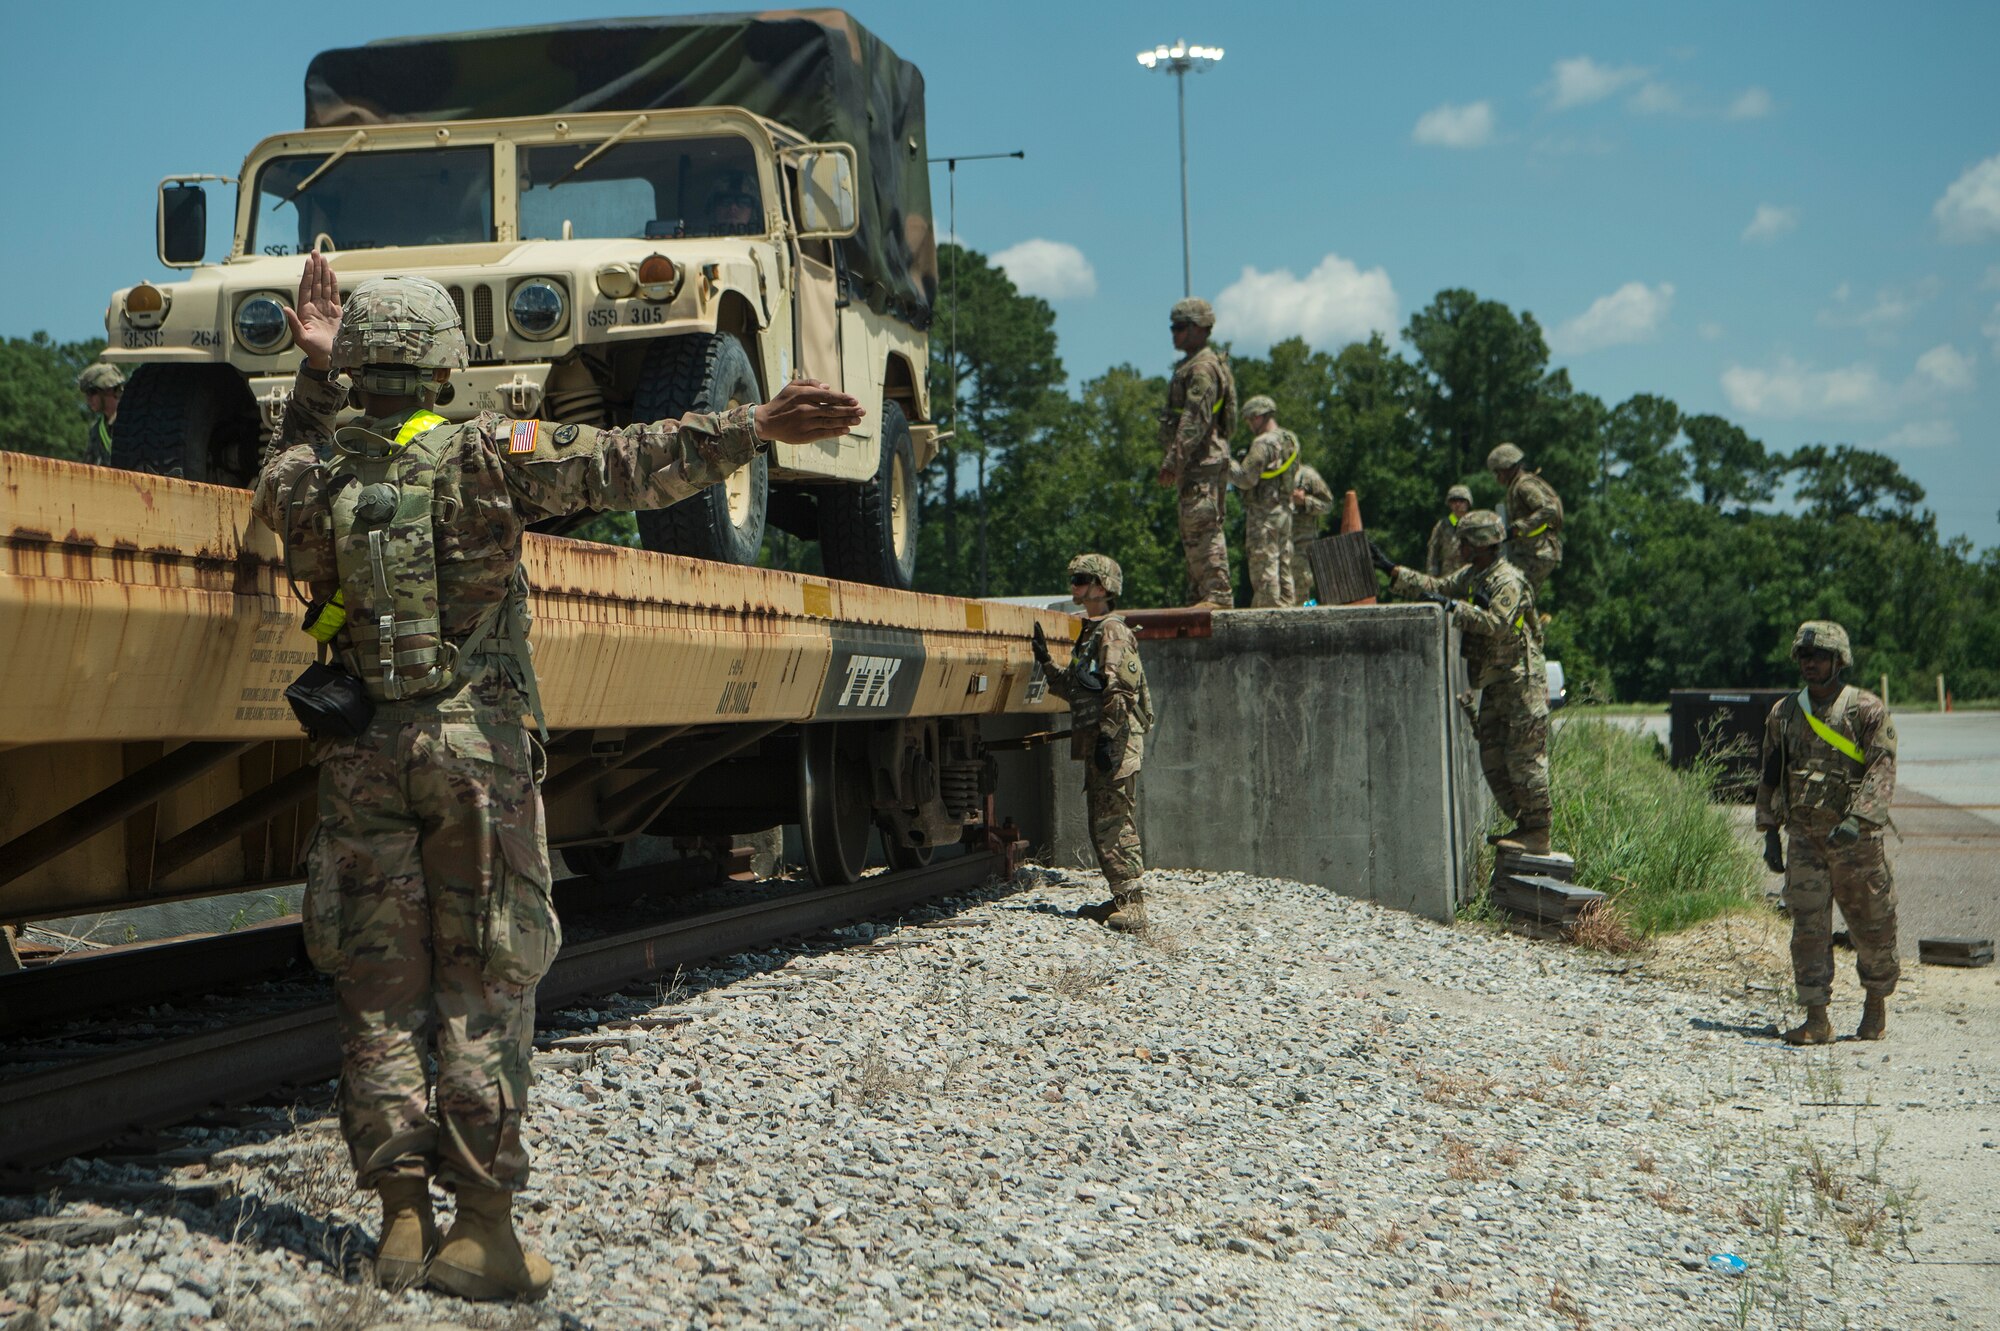 U.S. Army Soldiers from Fort Bragg, N.C., direct a High Mobility Multipurpose Wheeled Vehicle onto a rail system during Exercise Dragon Lifeline Aug. 7, 2019, at Joint Base Charleston’s Naval Weapons Station, S.C. The deployment readiness exercise combined the capabilities of service members from Fort Bragg, N.C., Joint Base Charleston, S.C., and Joint Base Langley-Eustis, Va., and focused on the rapid deployment of equipment, vehicles and personnel. Participants shared knowledge and tested their efficiency in moving assets by air, land, rail and sea during the training event. The annual exercise is just one of the critical readiness exercises the DOD conducts to maintain a lethal and ready force. (U.S. Air Force photo by Tech. Sgt. Christopher Hubenthal)